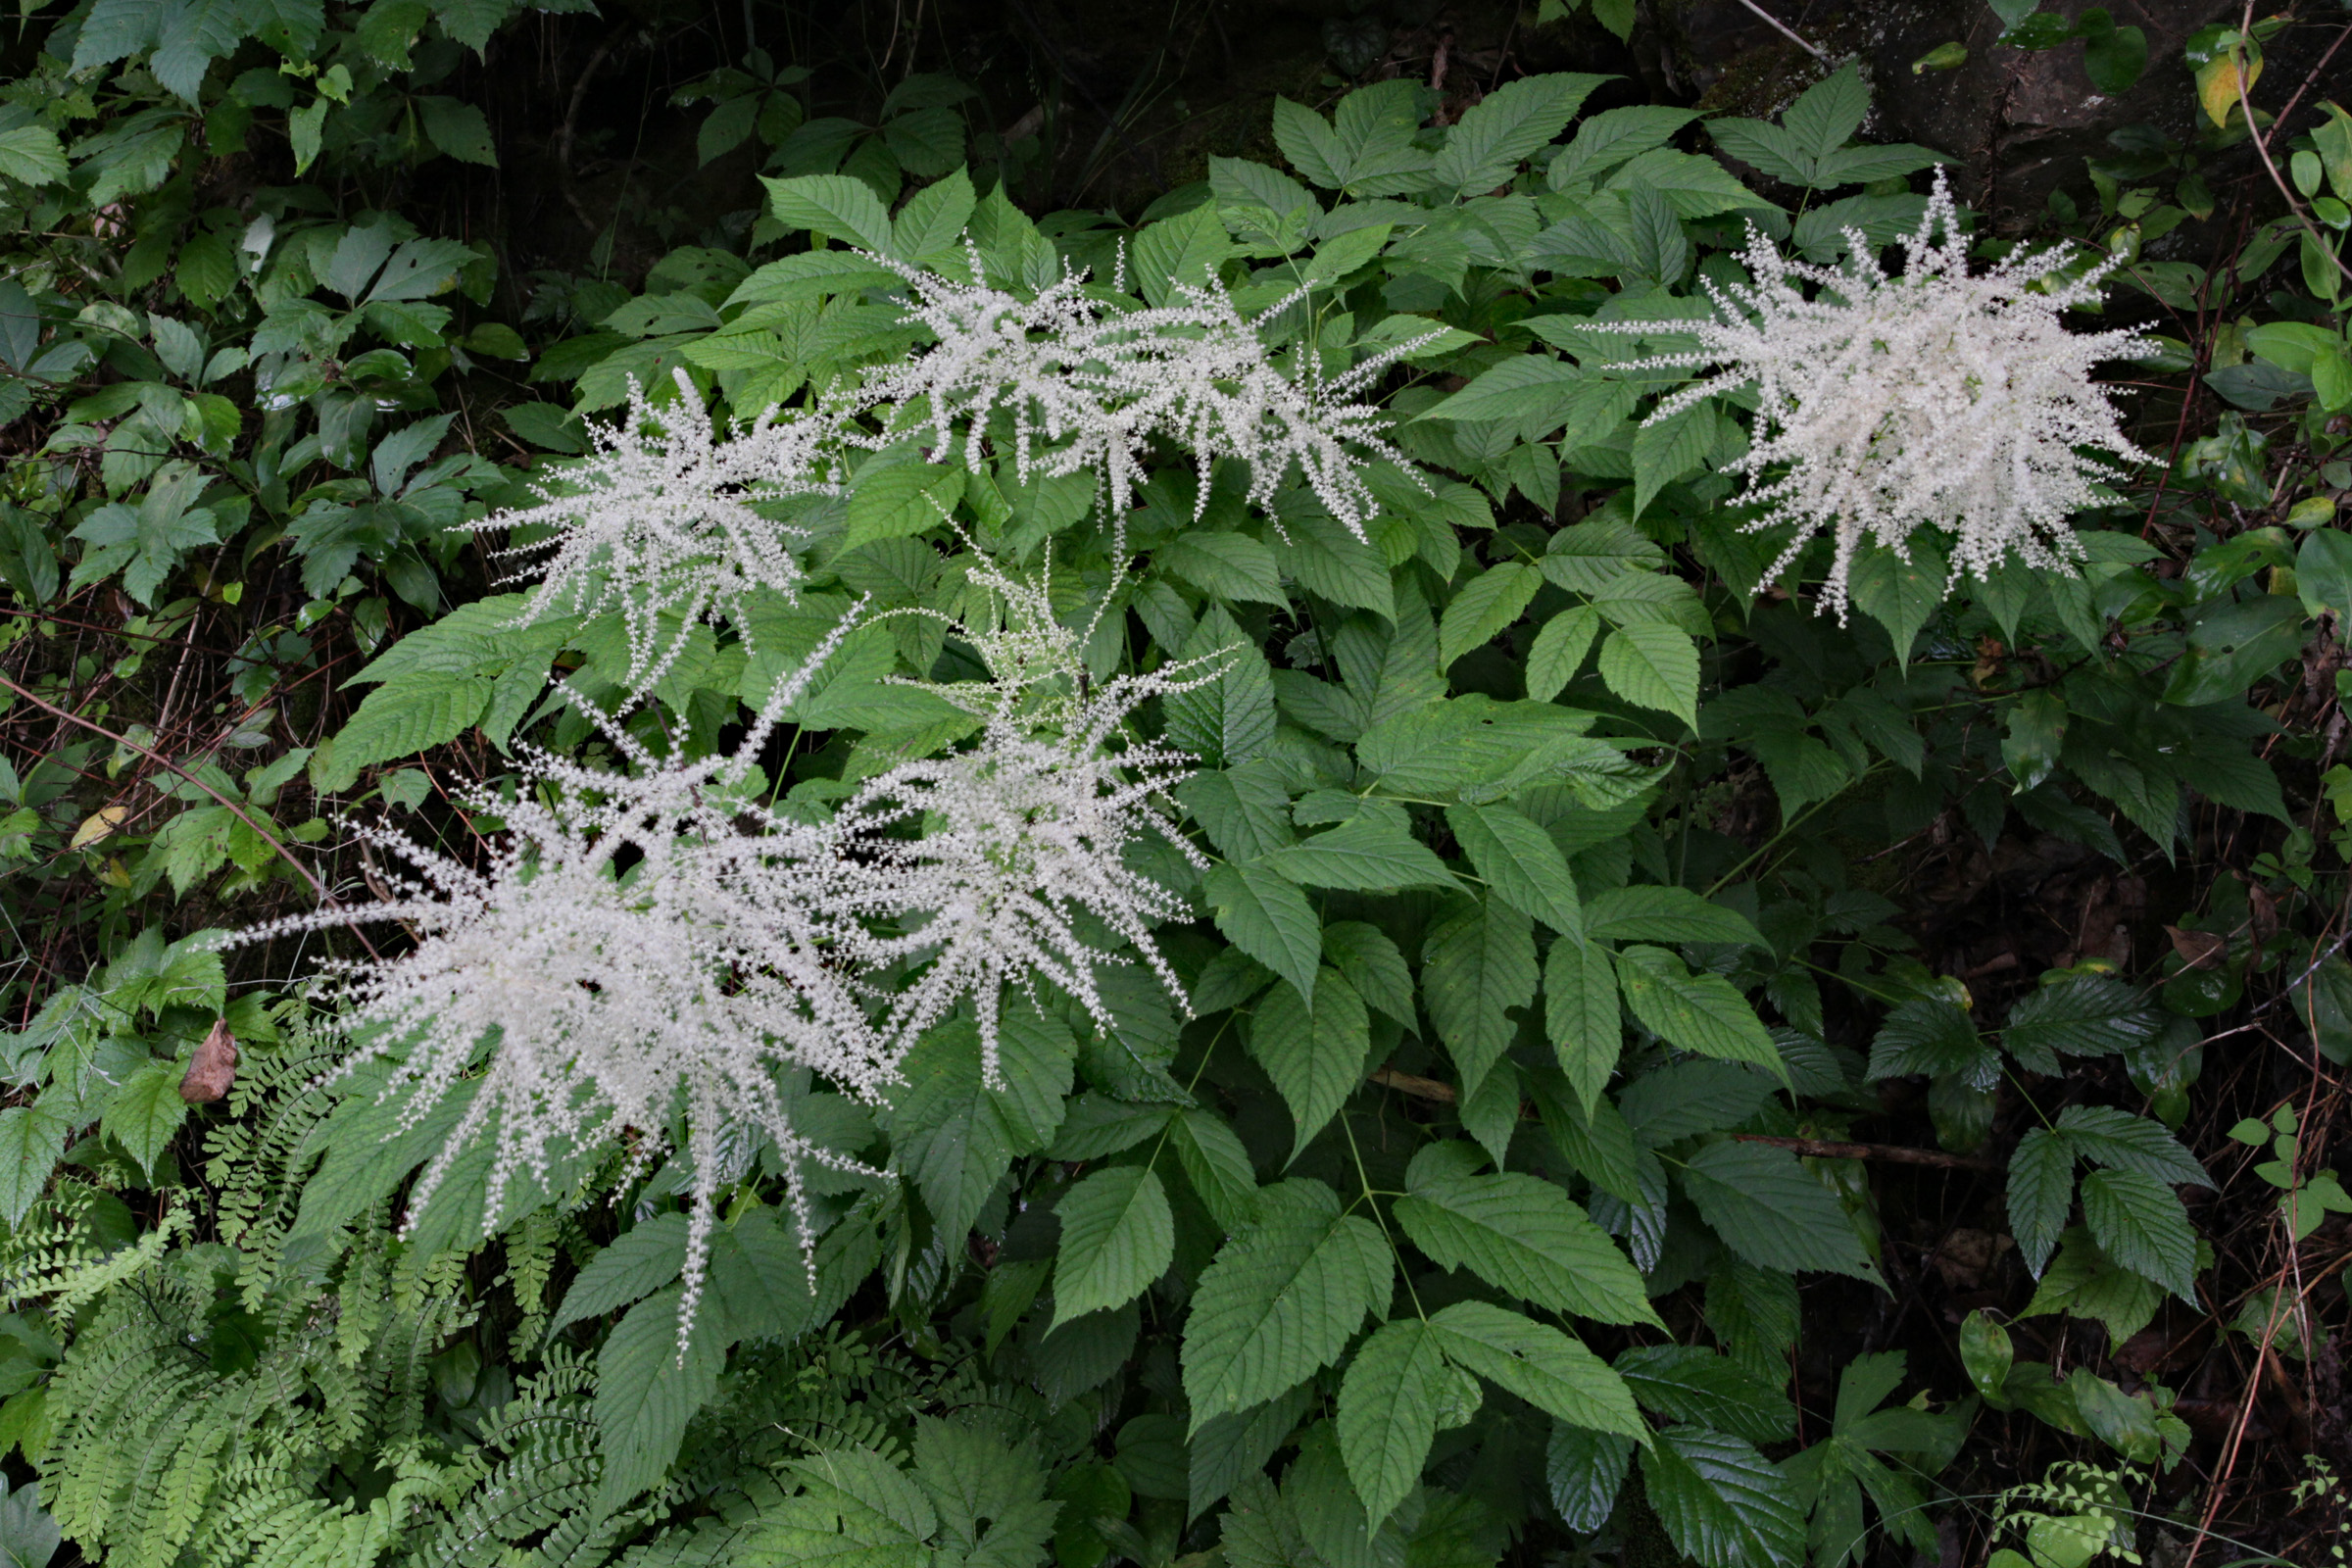 The Scientific Name is Aruncus dioicus var. dioicus. You will likely hear them called Eastern Goat's-beard. This picture shows the Goat's-beard produces dense panicles of tiny white blossoms in late spring. of Aruncus dioicus var. dioicus